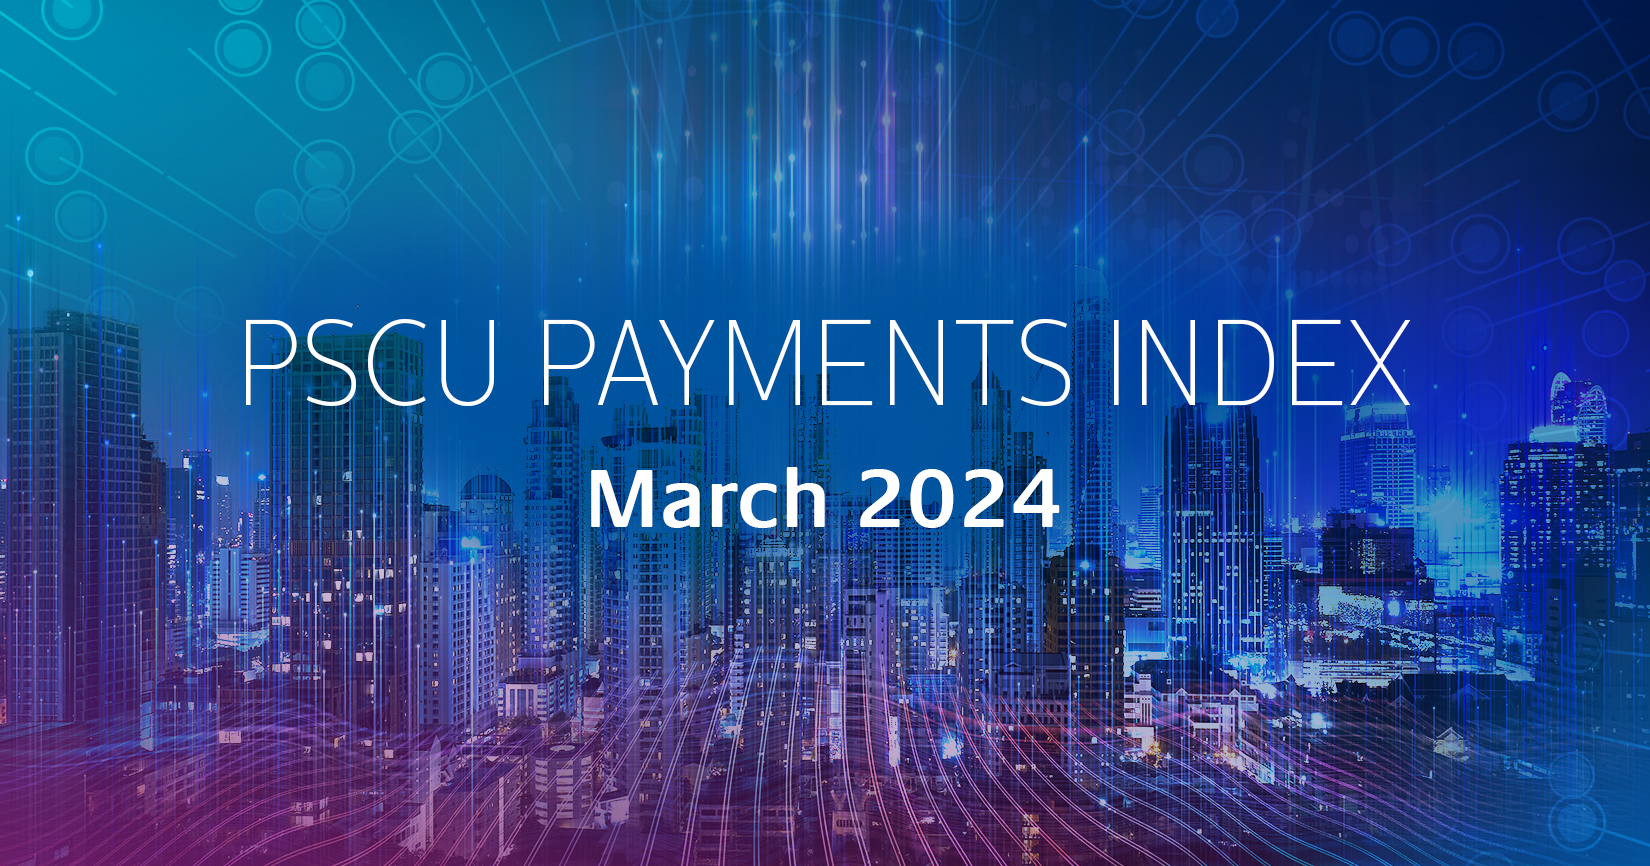 "PSCU Payments Index March 2024: A Deep Dive into Gambling post thumbnail"